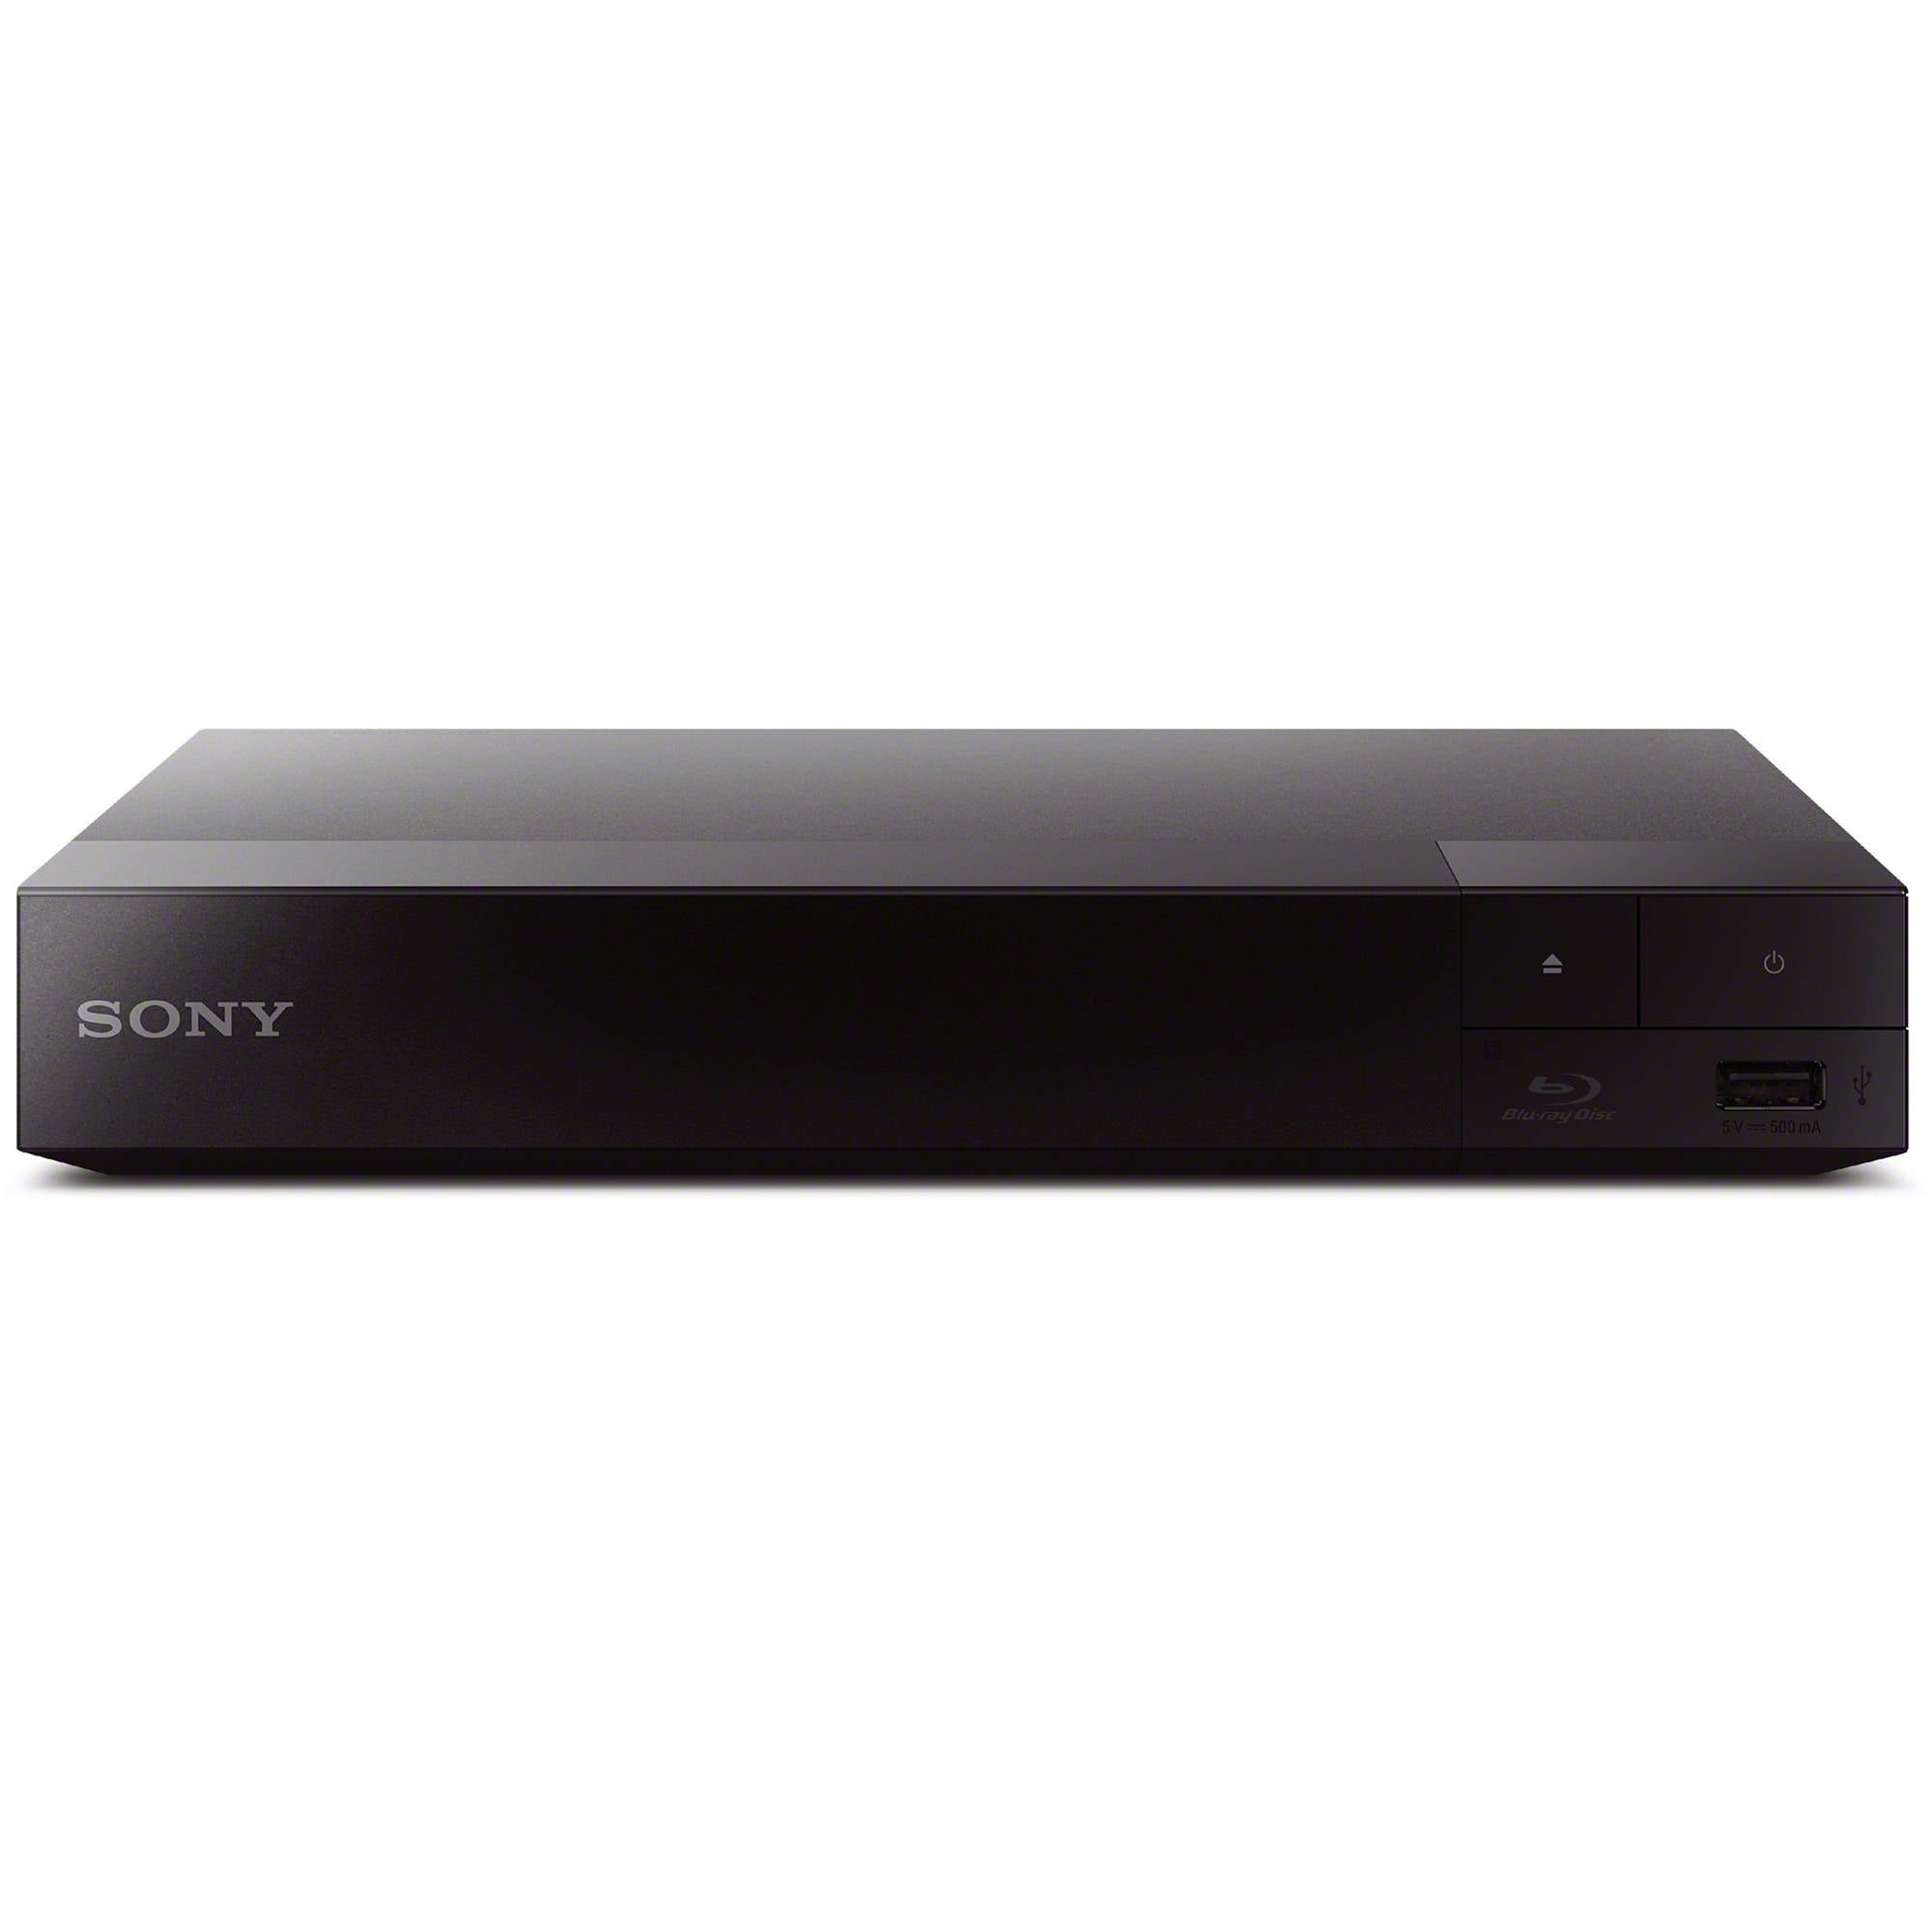 meel trommel roltrap Sony Streaming Blu-ray Disc Player with Built-in Wi-Fi - BDP-S3700 -  Walmart.com